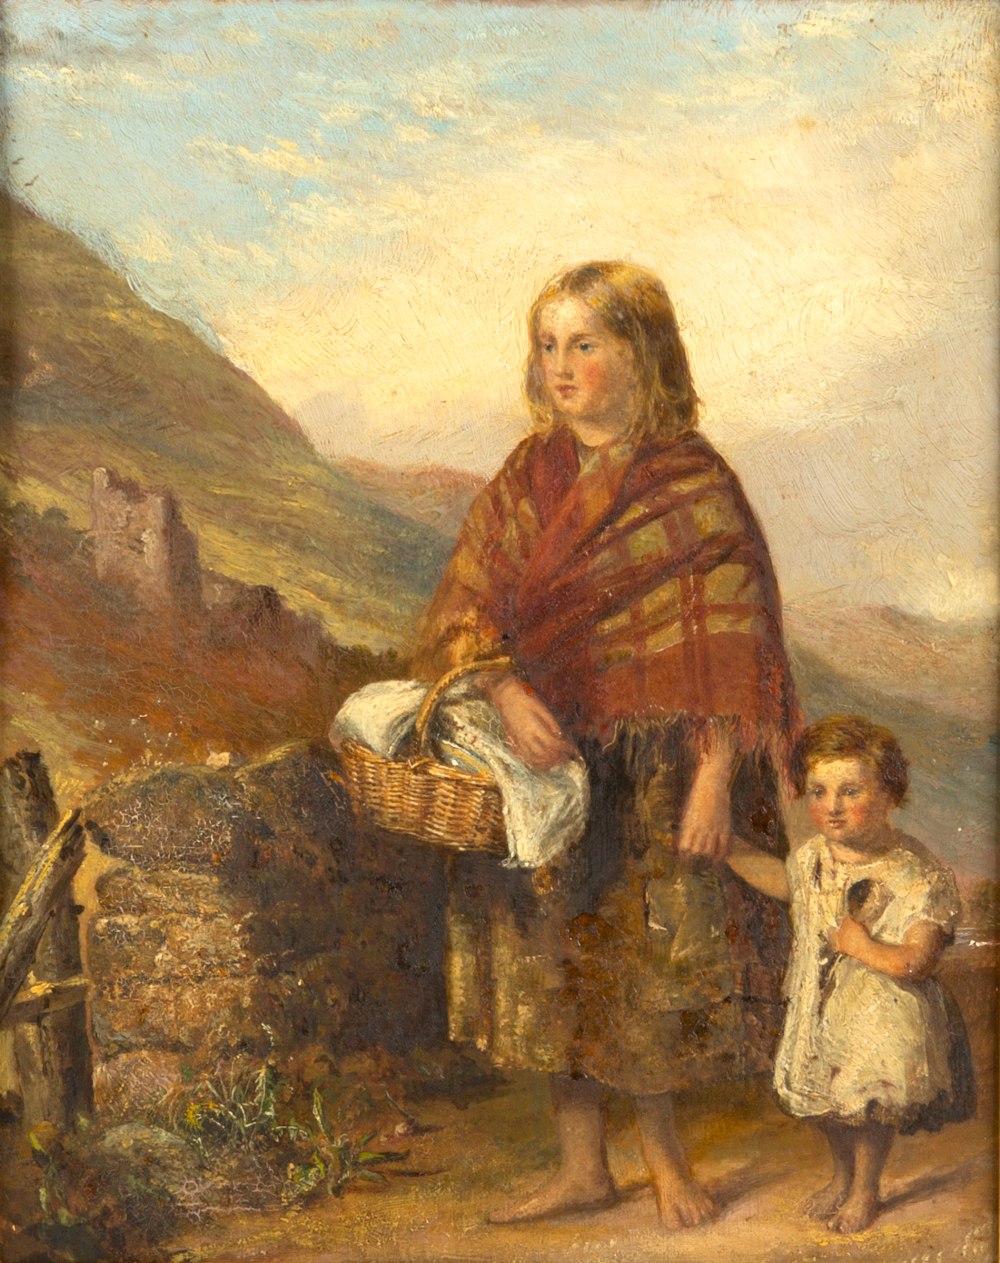 LATE 19TH CENTURY GIRL AND YOUNG CHILD on a mountain path, oil on board, 24.5cm x 19.5cm, mounted in - Image 8 of 8